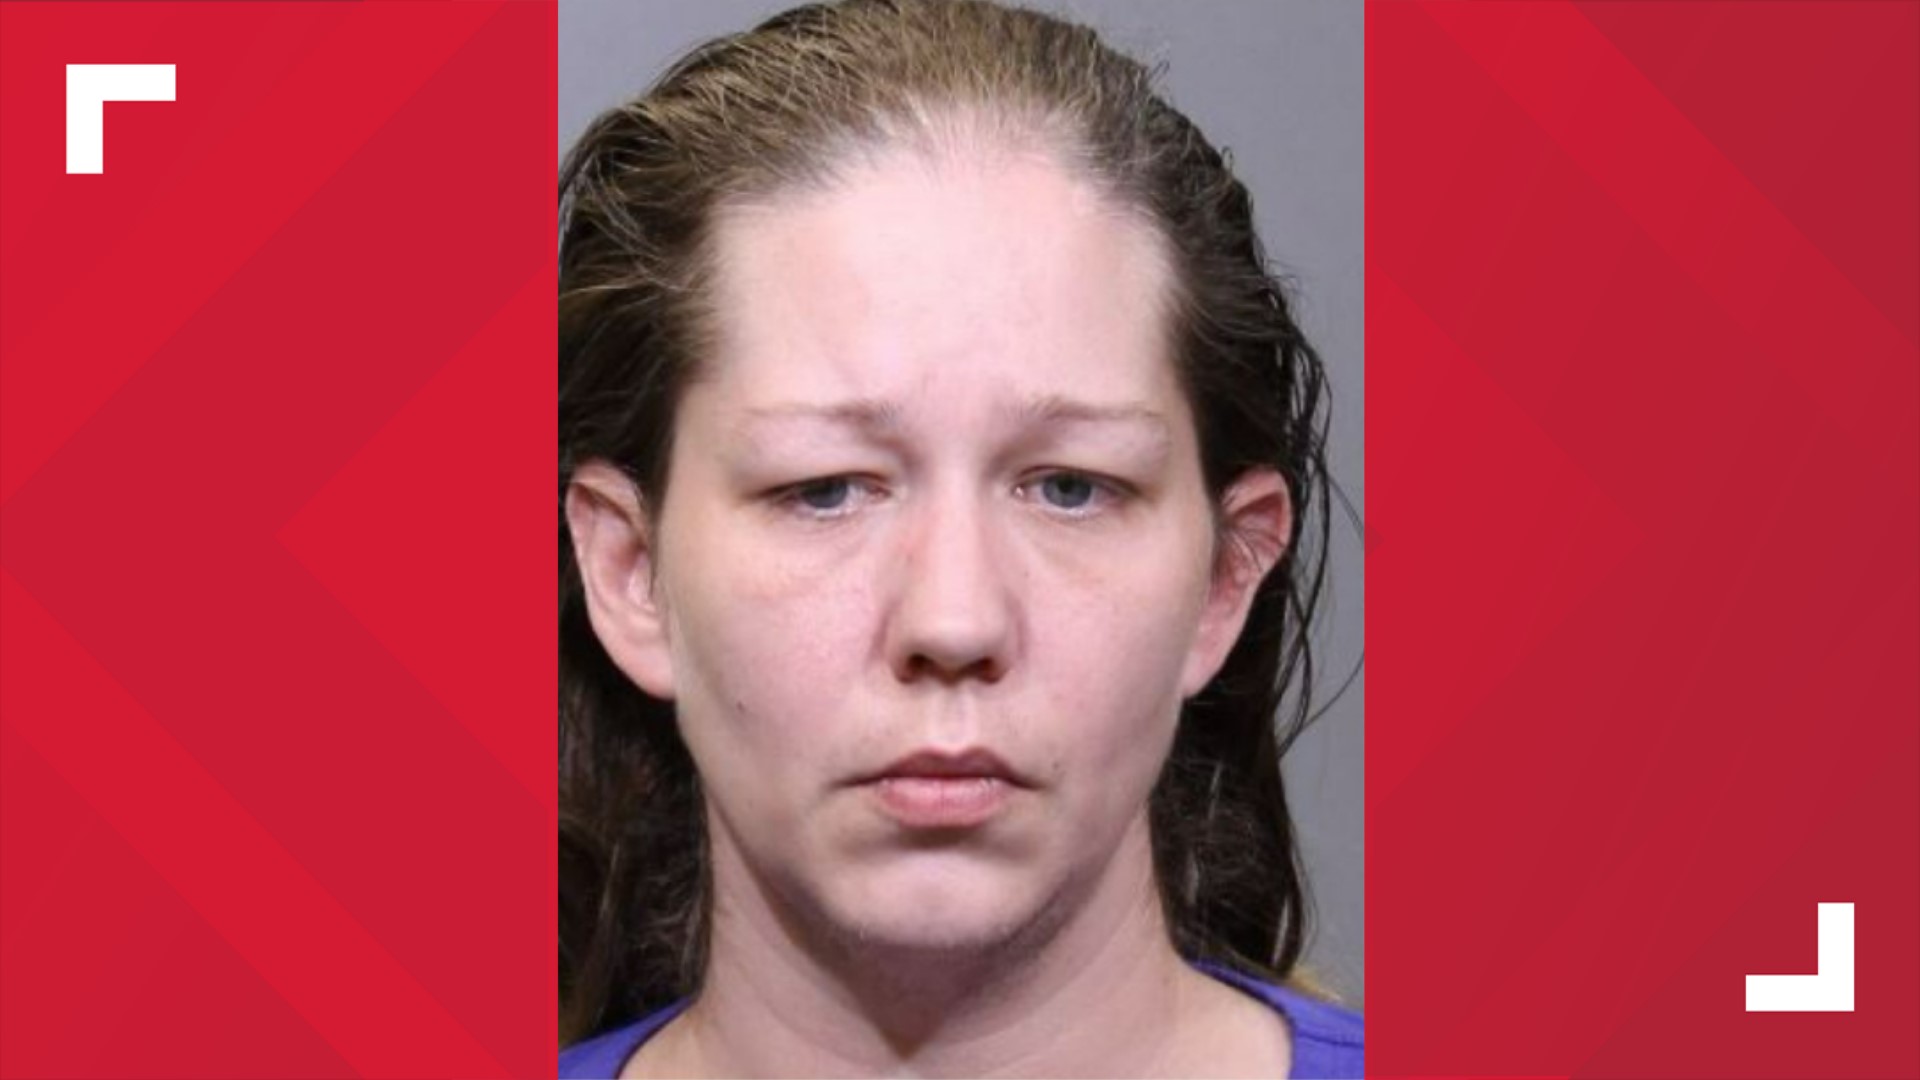 Police said detectives arrested the baby's mother, 38-year-old Melissa Thorp, and charged her with murder for causing the baby's death.